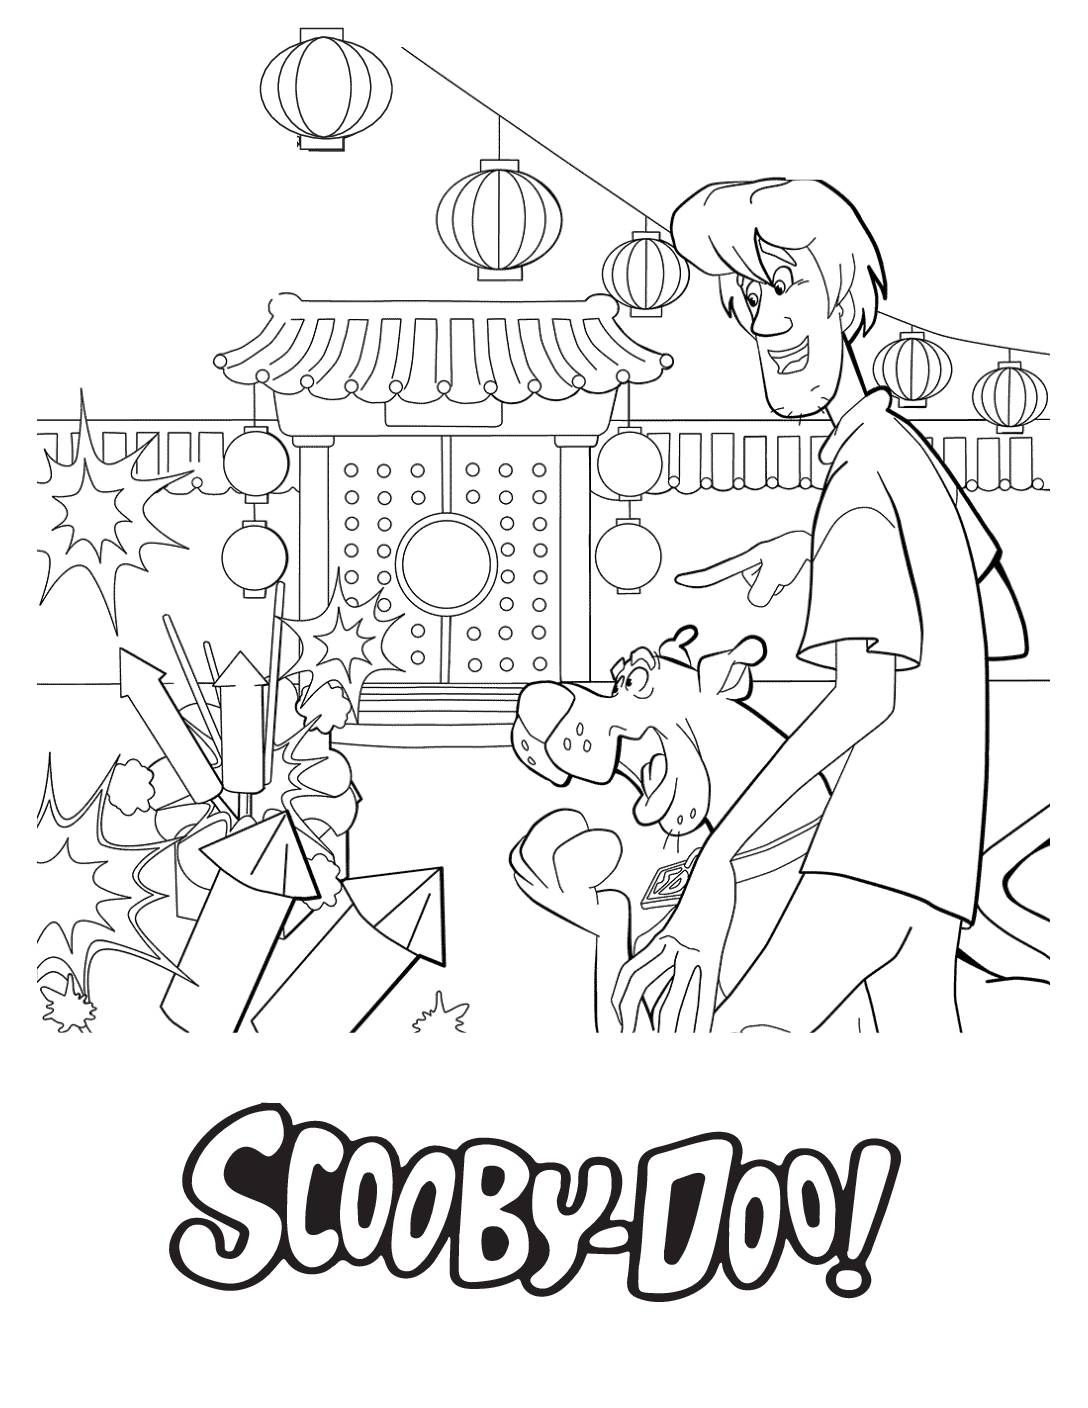 Coloring Page  Scooby Doo  pdf